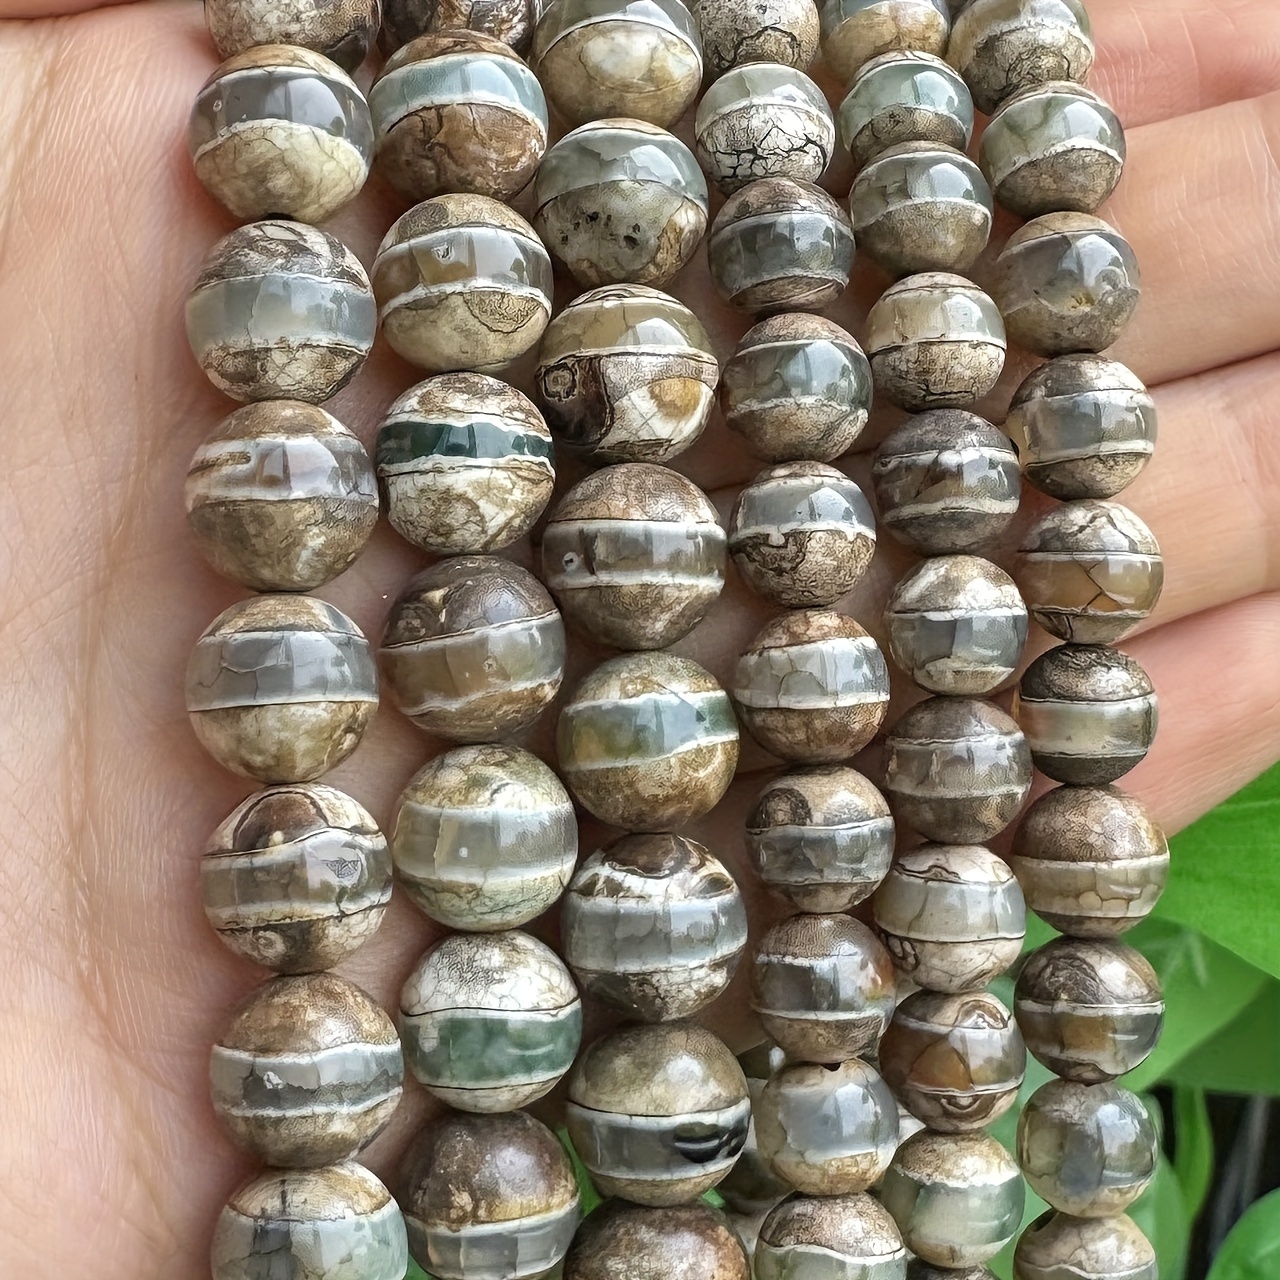 

Natural Stone Agate Beads, Tibetan Dzi, Round Loose Bead Spacers For Jewelry Making Diy, Unique Bracelet Necklace Crafting, Men's Gift - Approx 35/45pcs